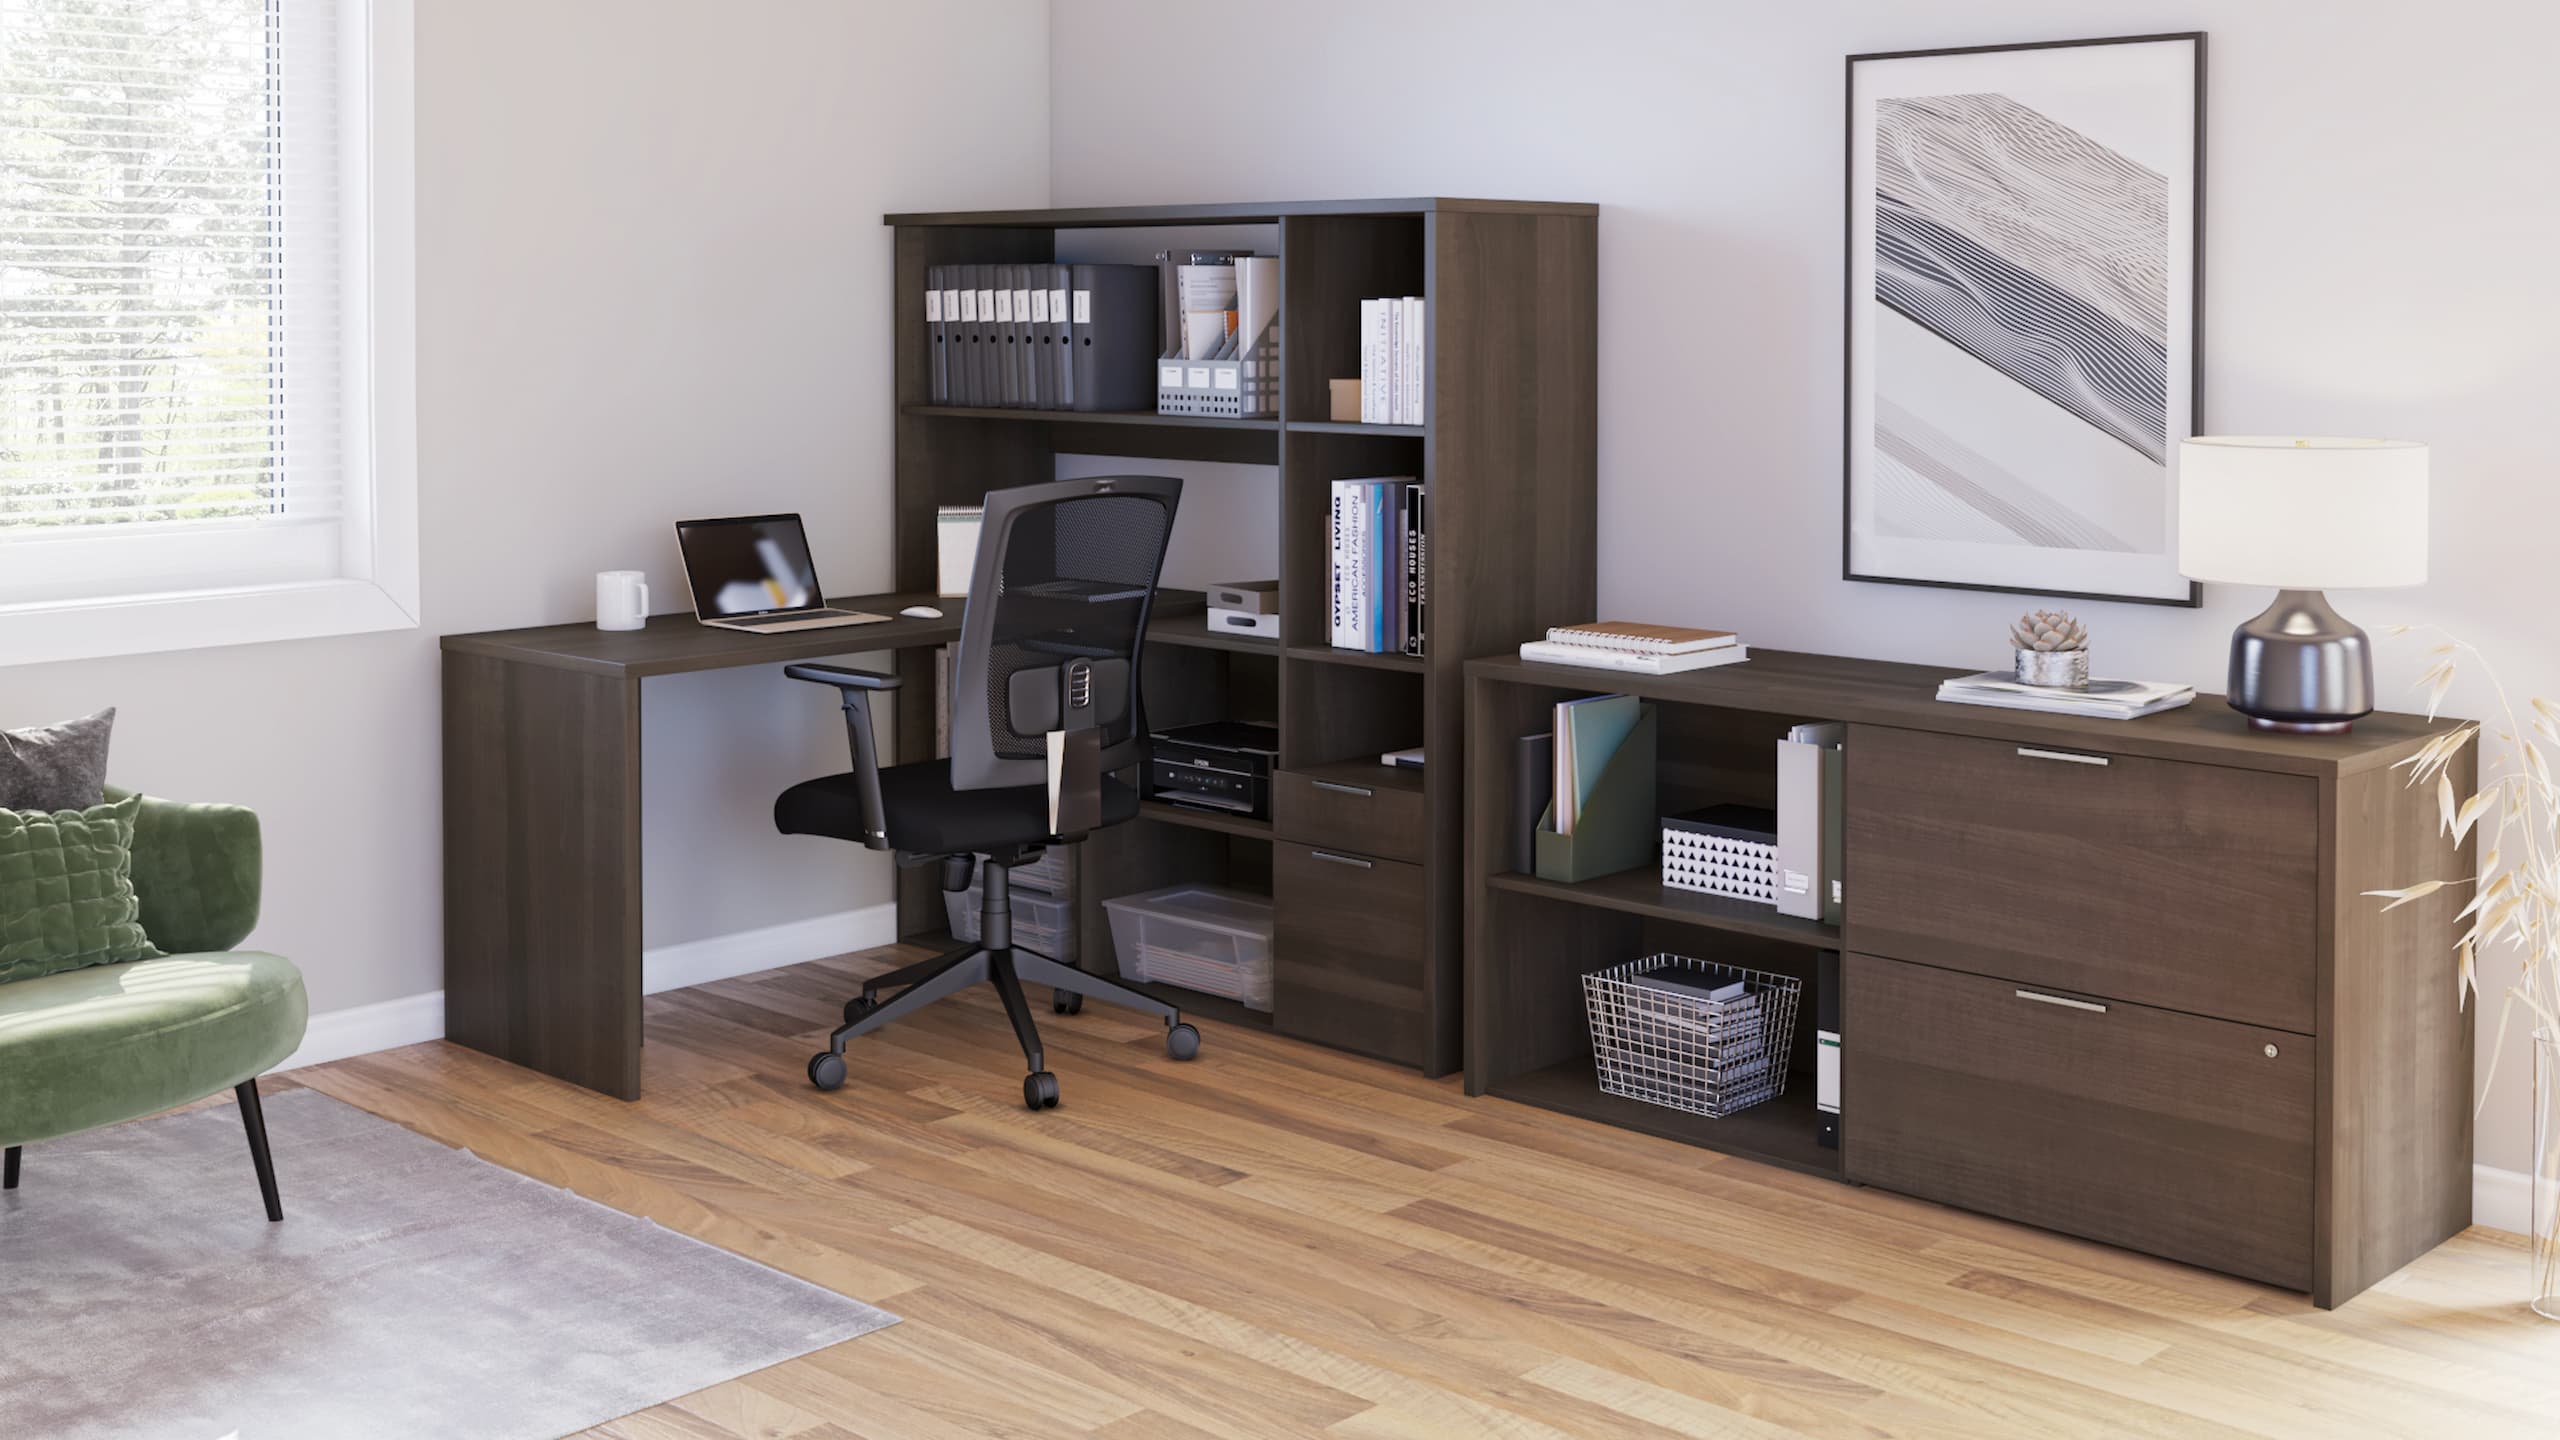 Convenient and stylish desk set in an home office